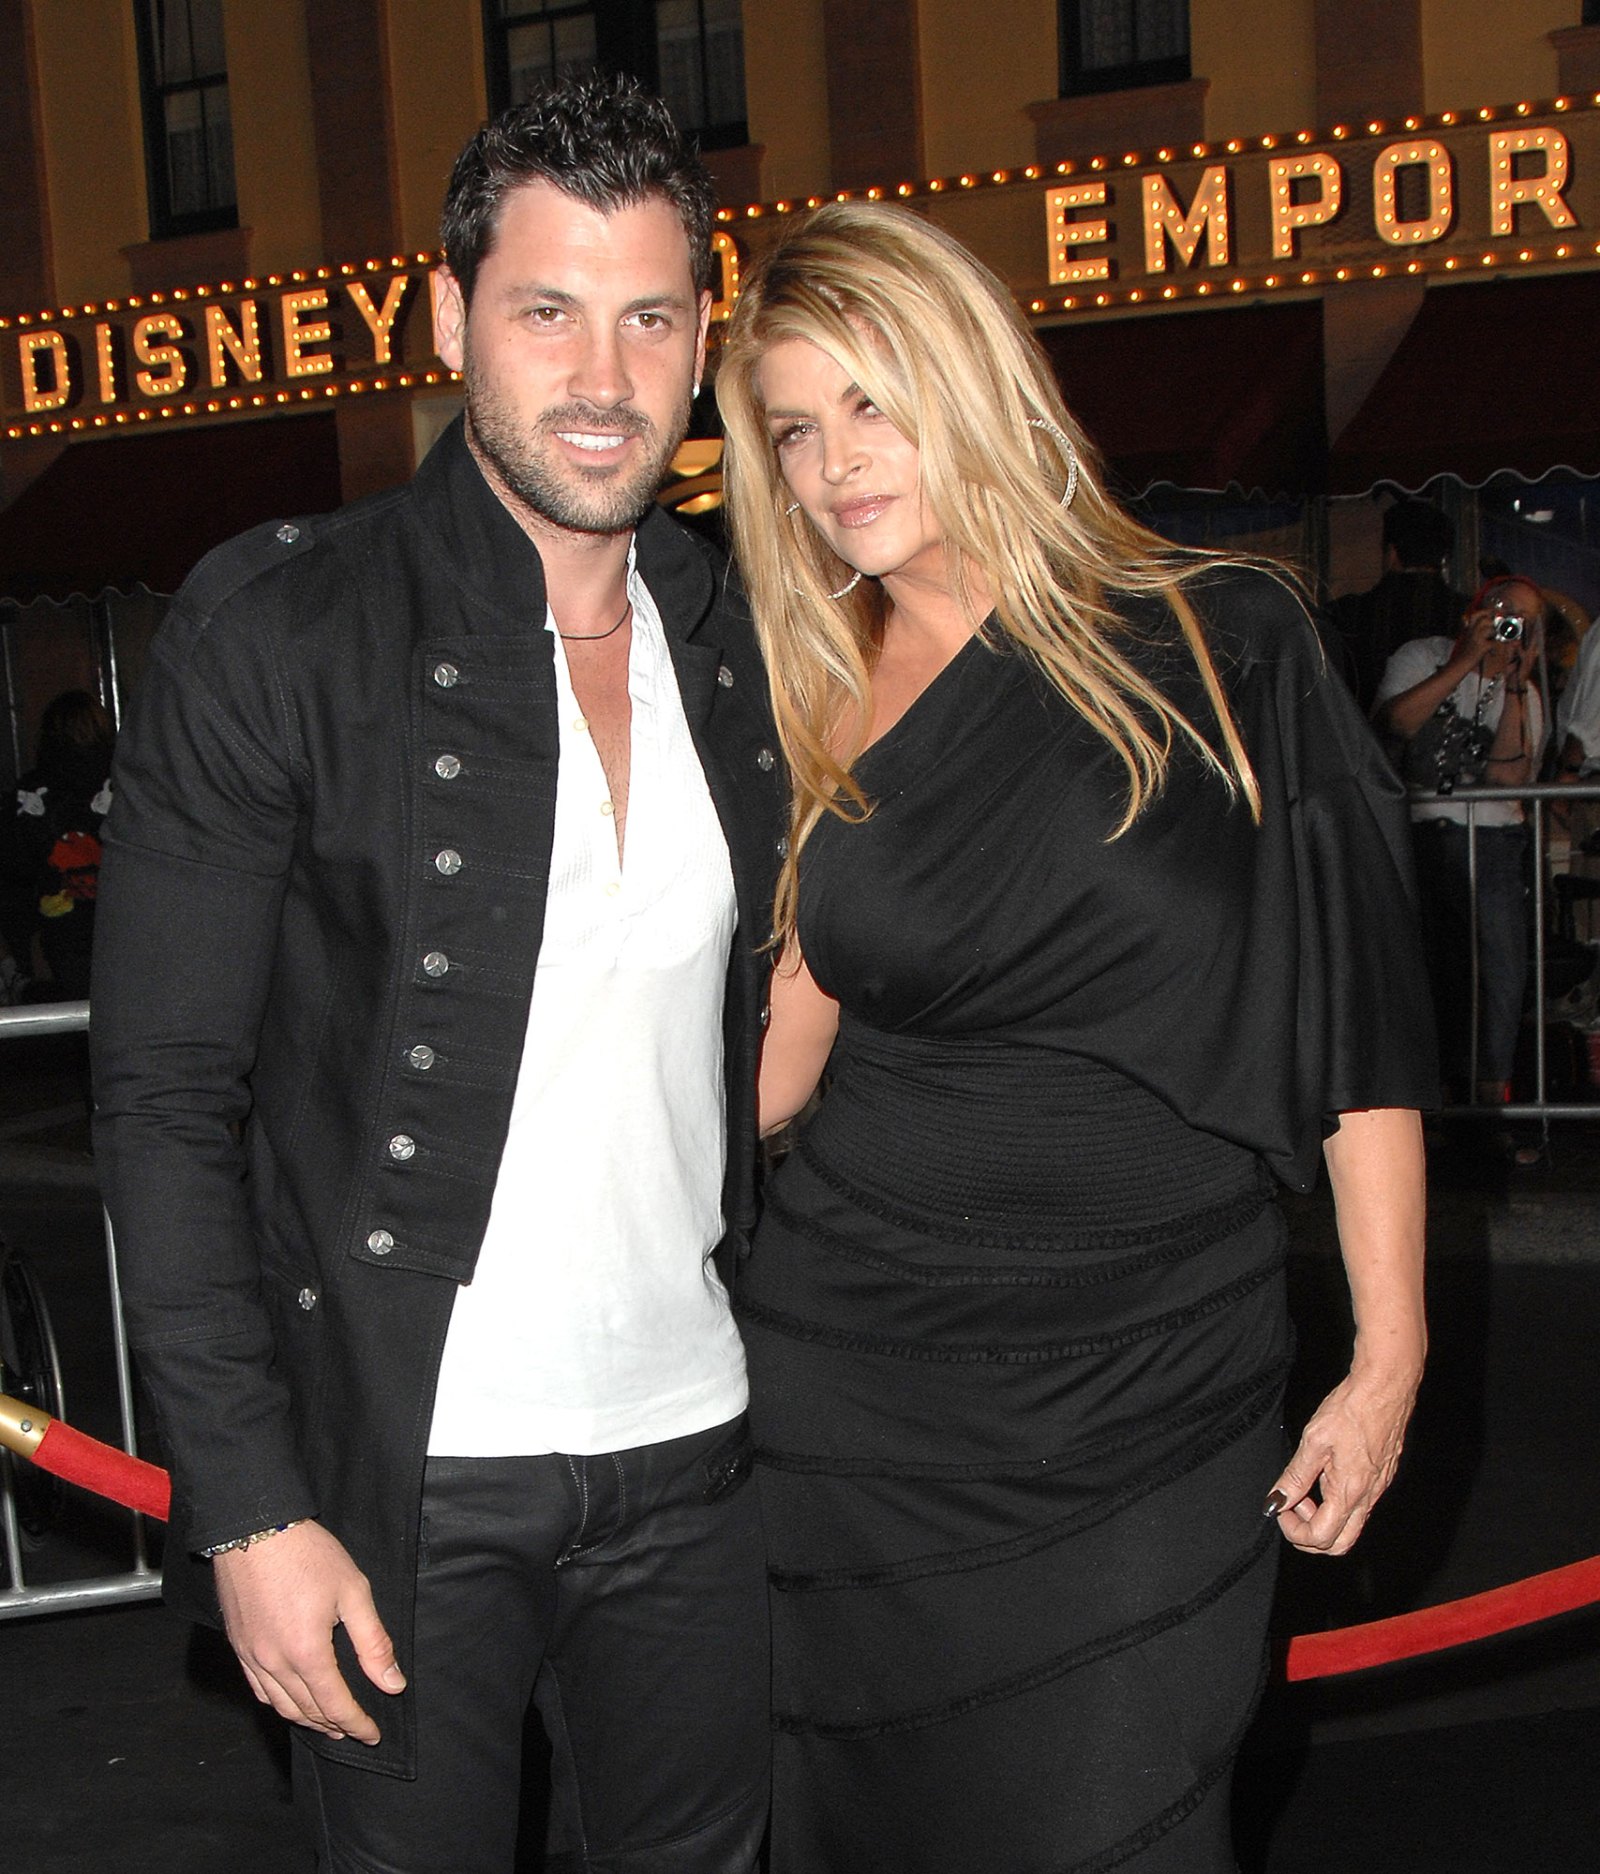 Maksim Chmerkovskiy and Kirstie Alley Ups and Downs Over the Years